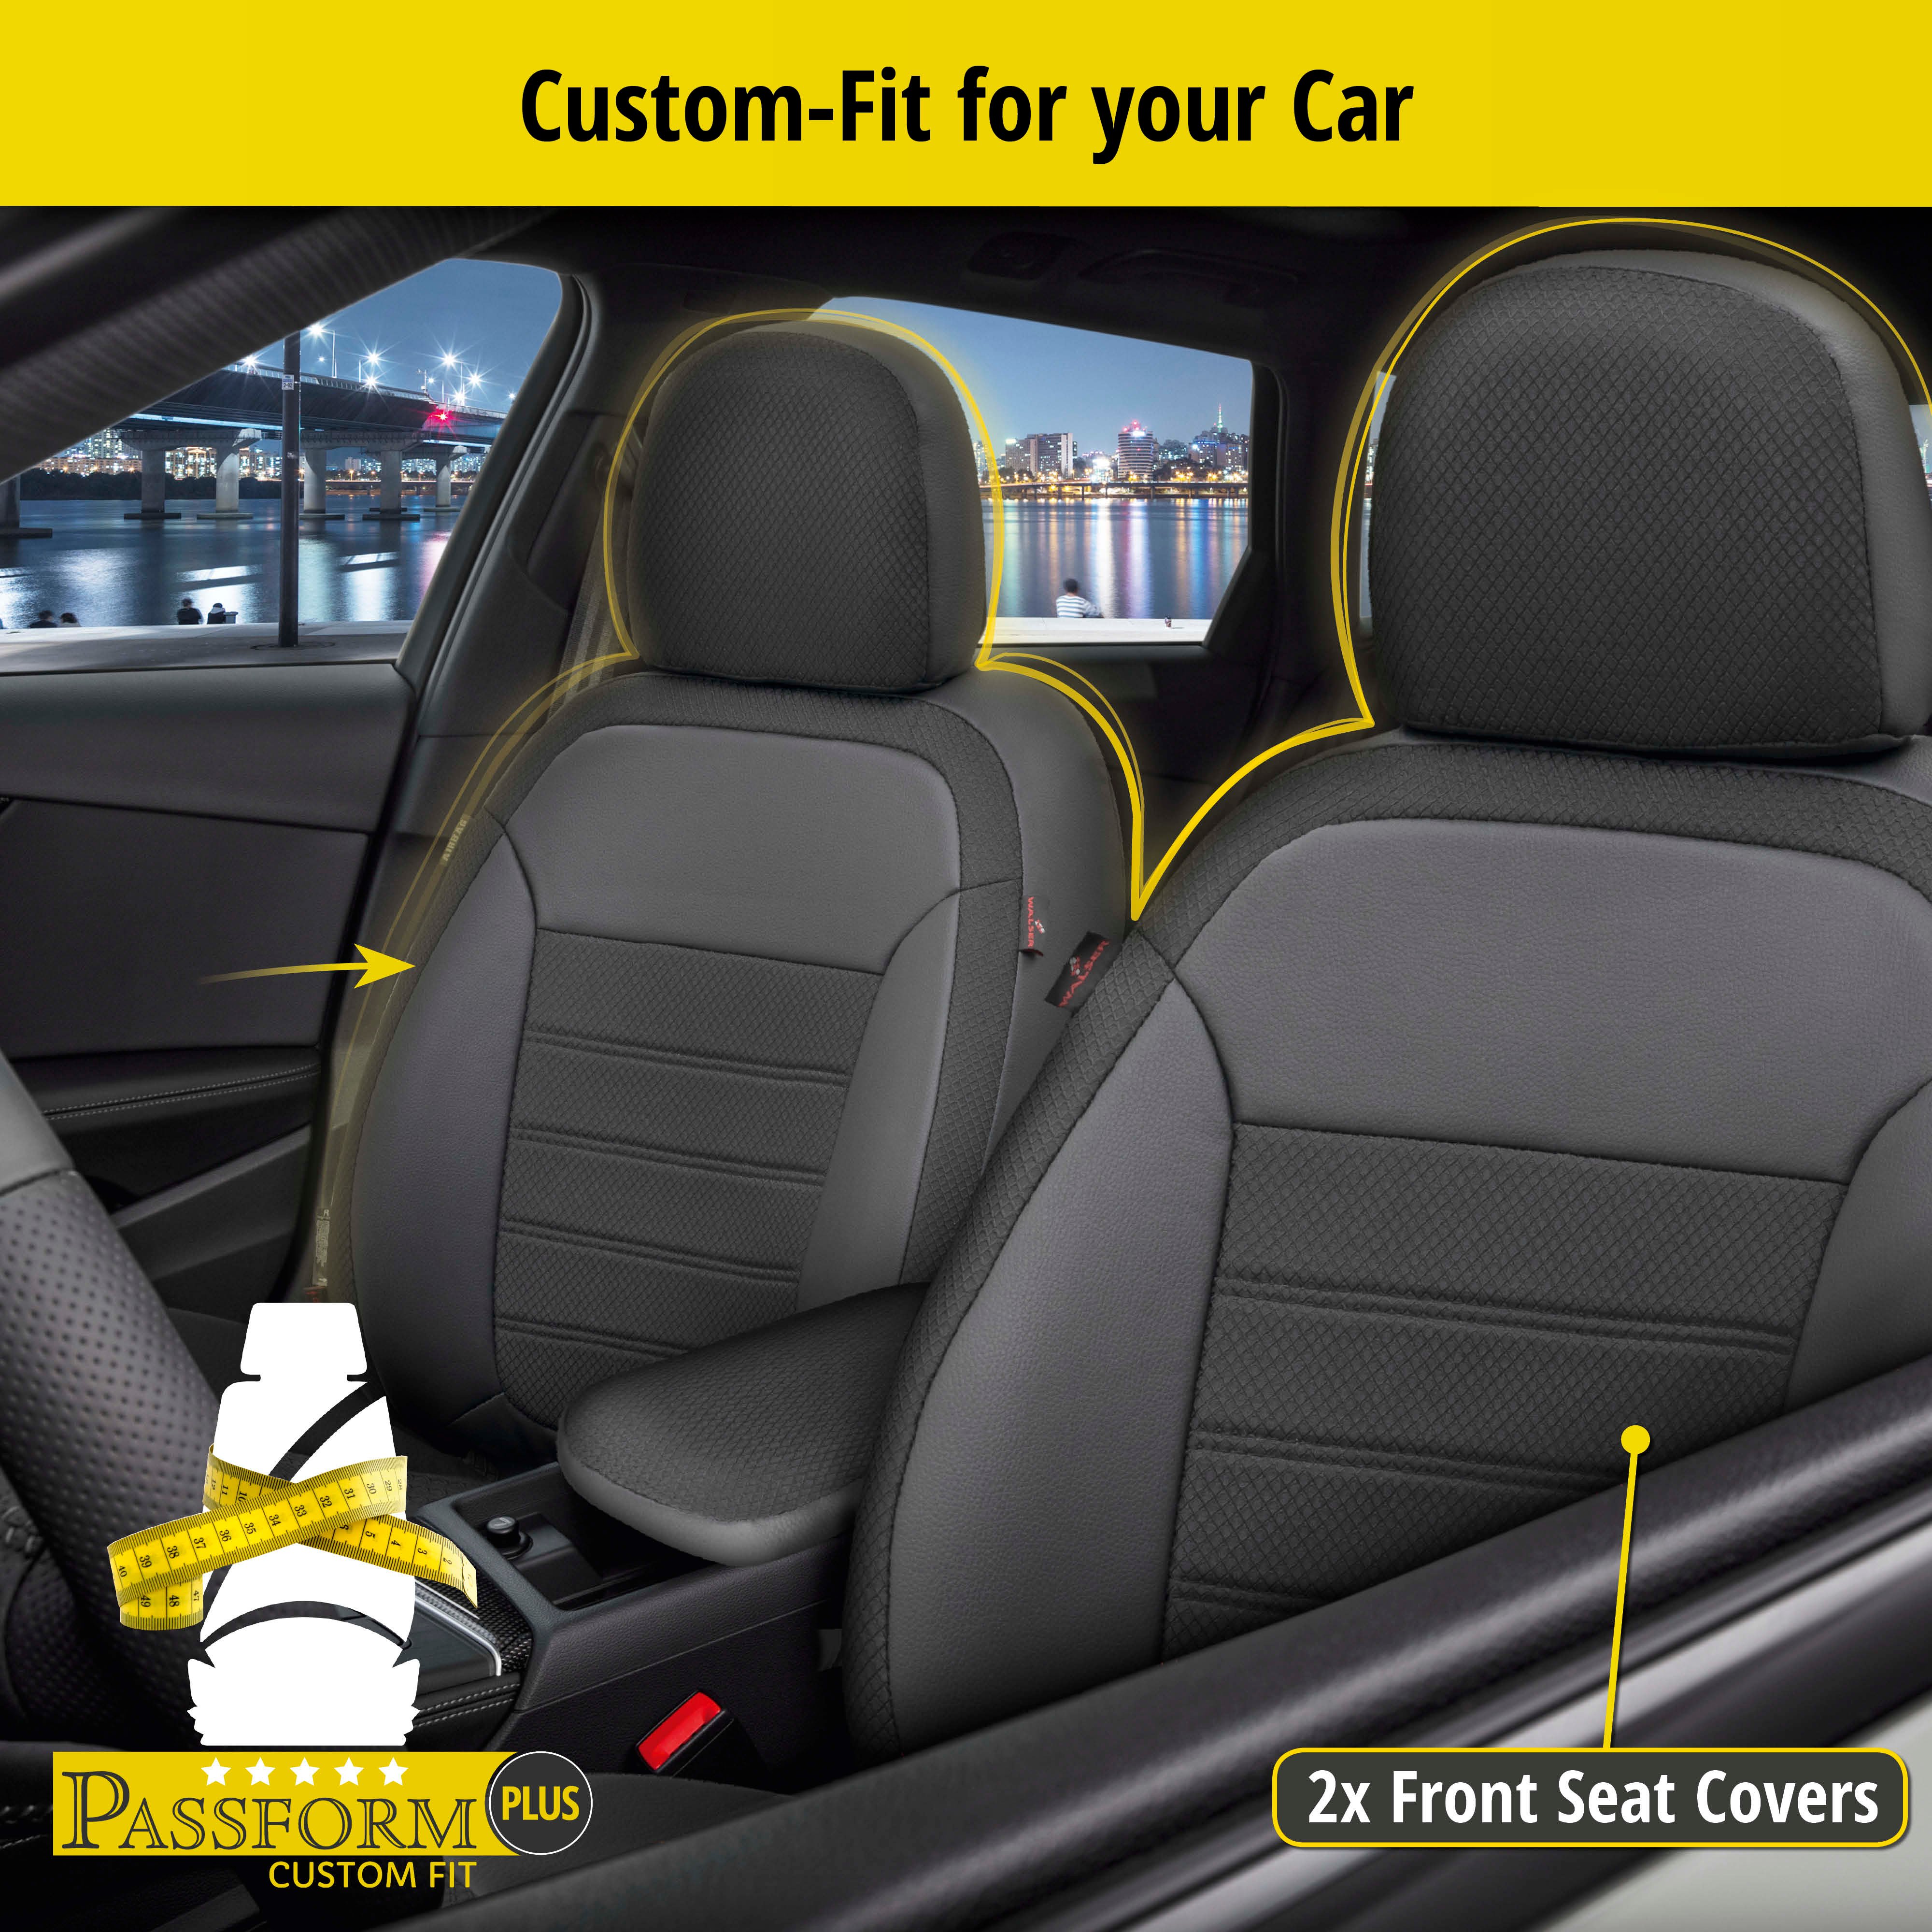 Seat Cover Aversa for Skoda Octavia III Combi (5E5) 11/2012-Today, 2 seat covers for normal seats